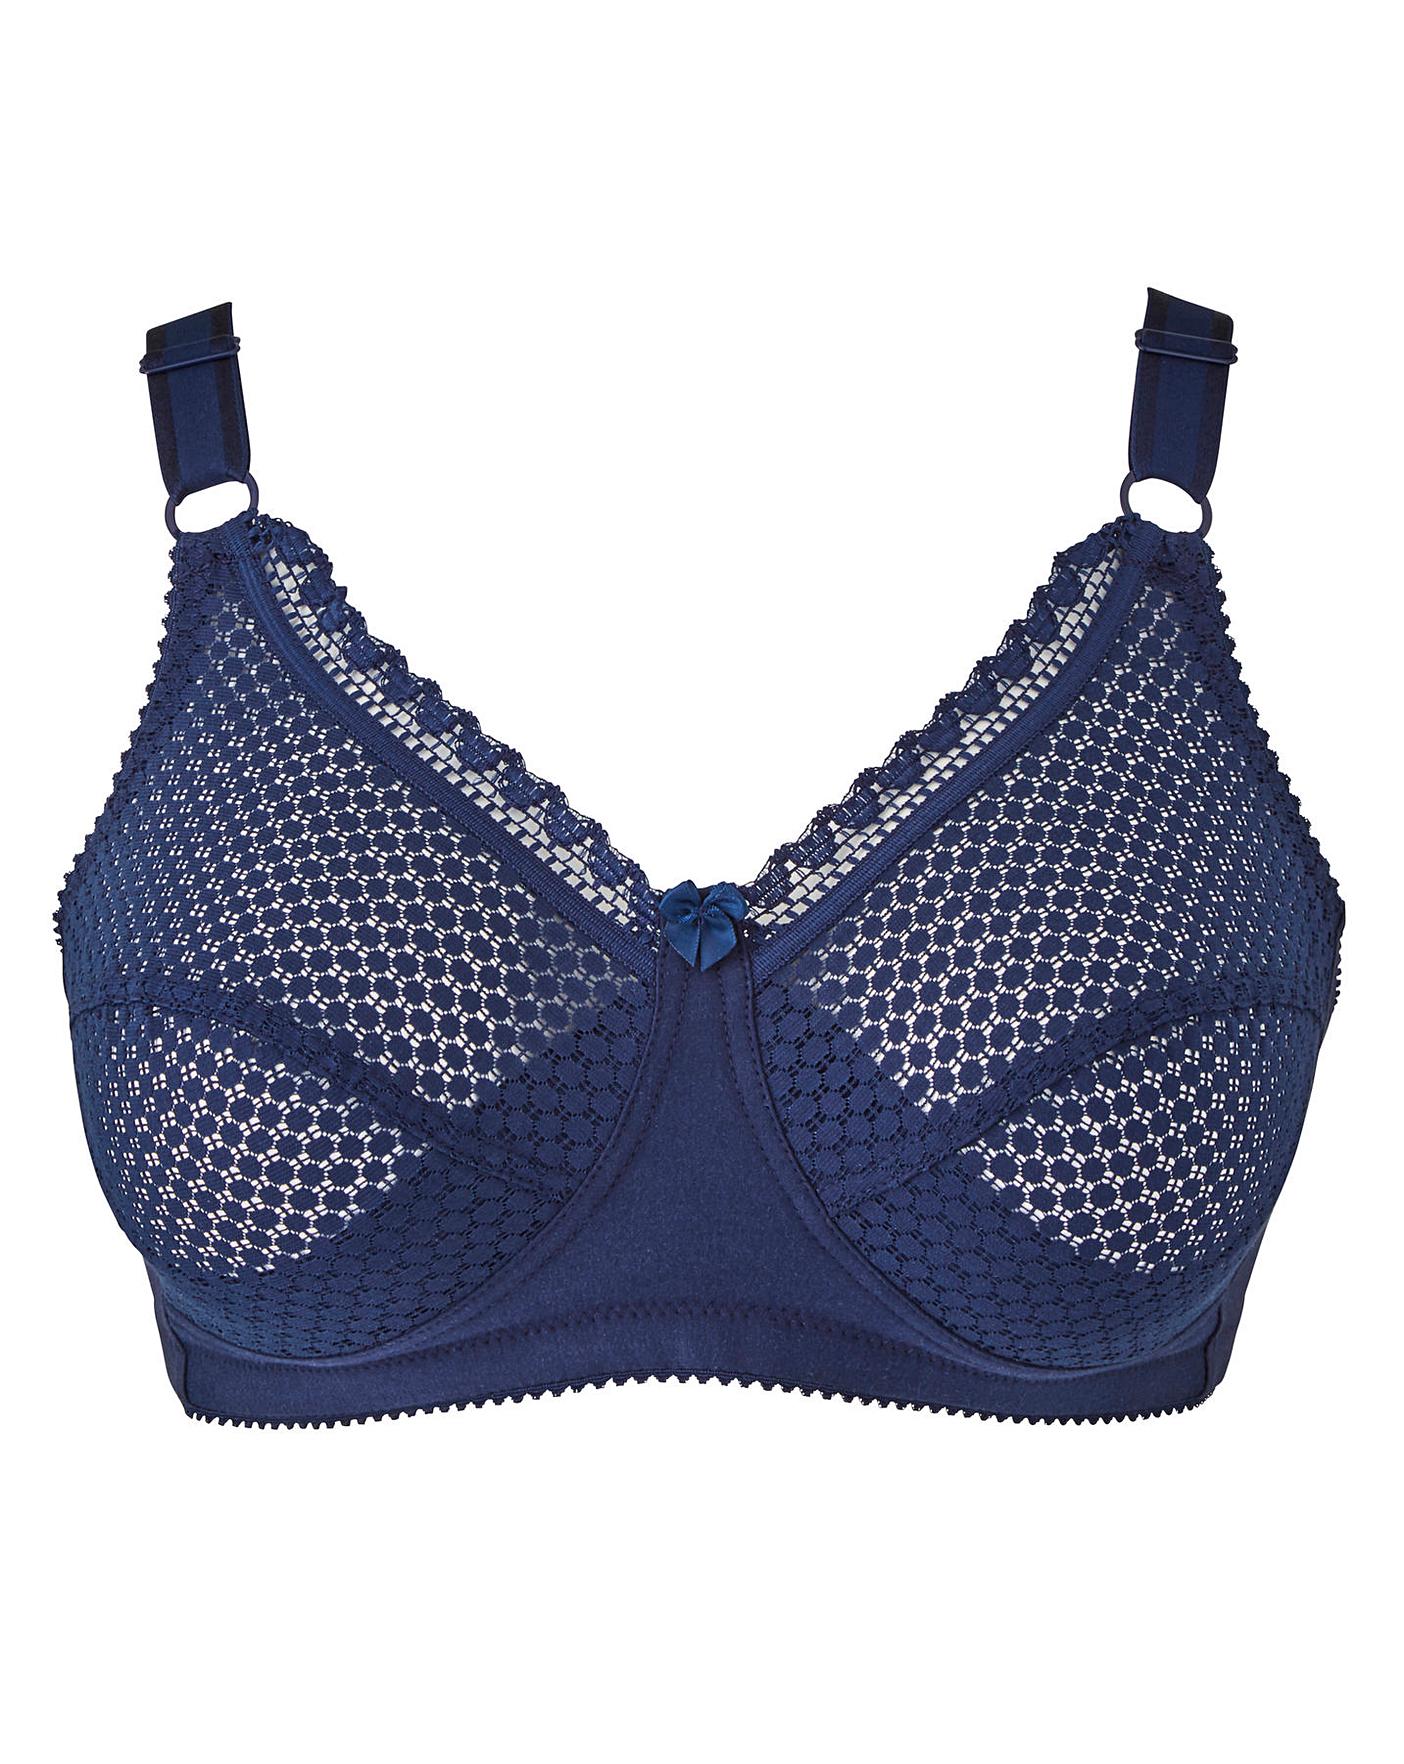 Bra - Size 48H - Shop at Miss Mary of Sweden